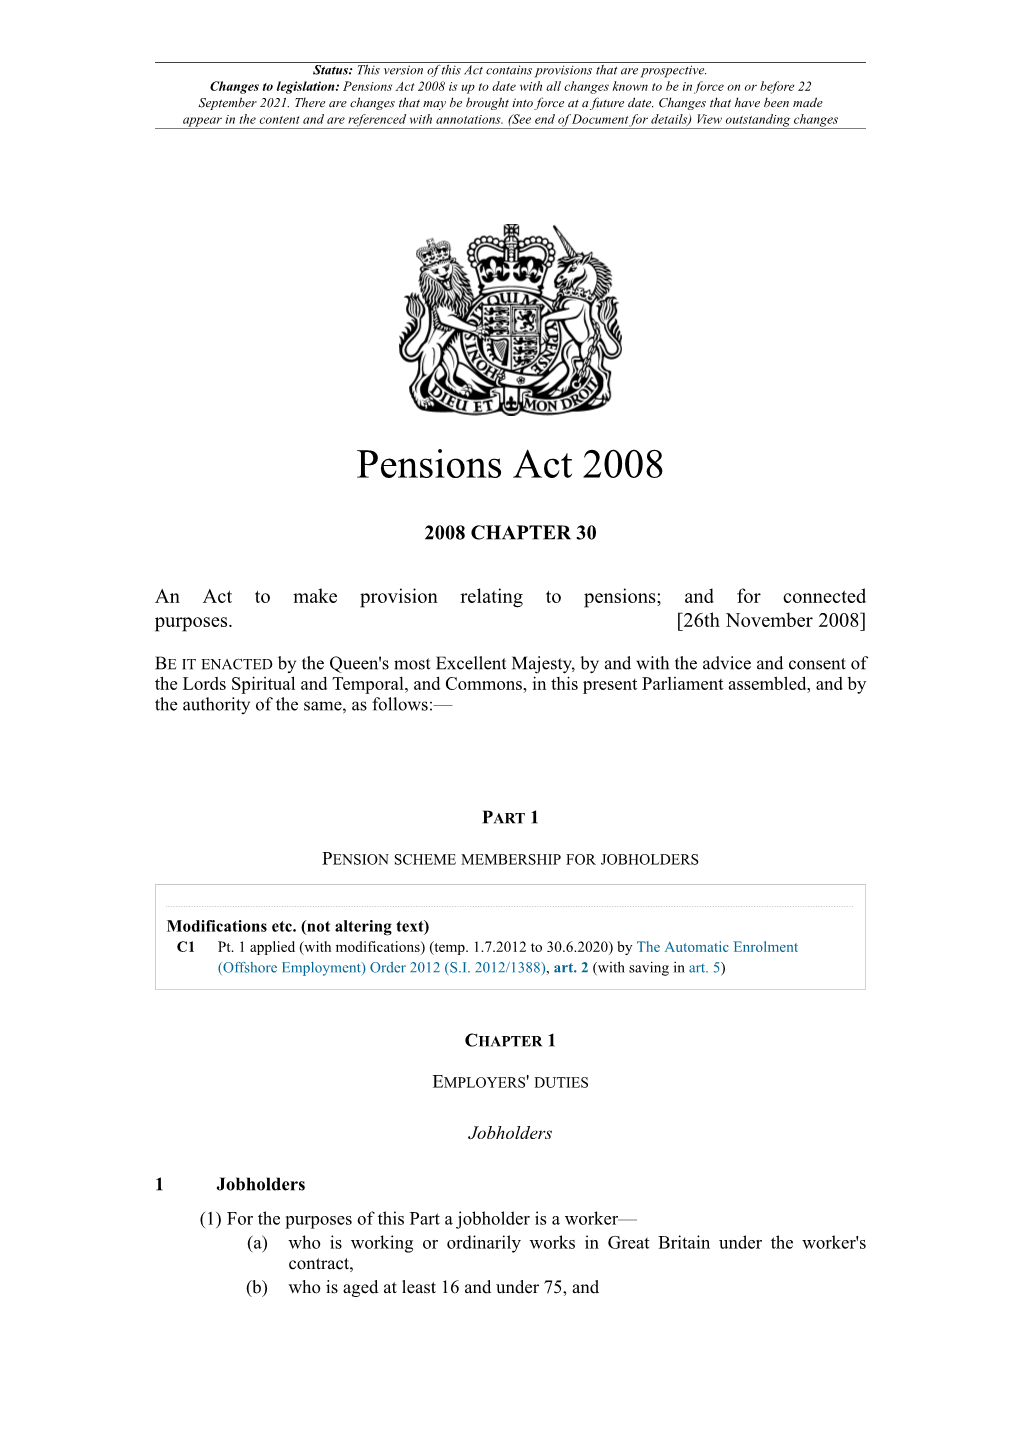 Pensions Act 2008 Is up to Date with All Changes Known to Be in Force on Or Before 22 September 2021